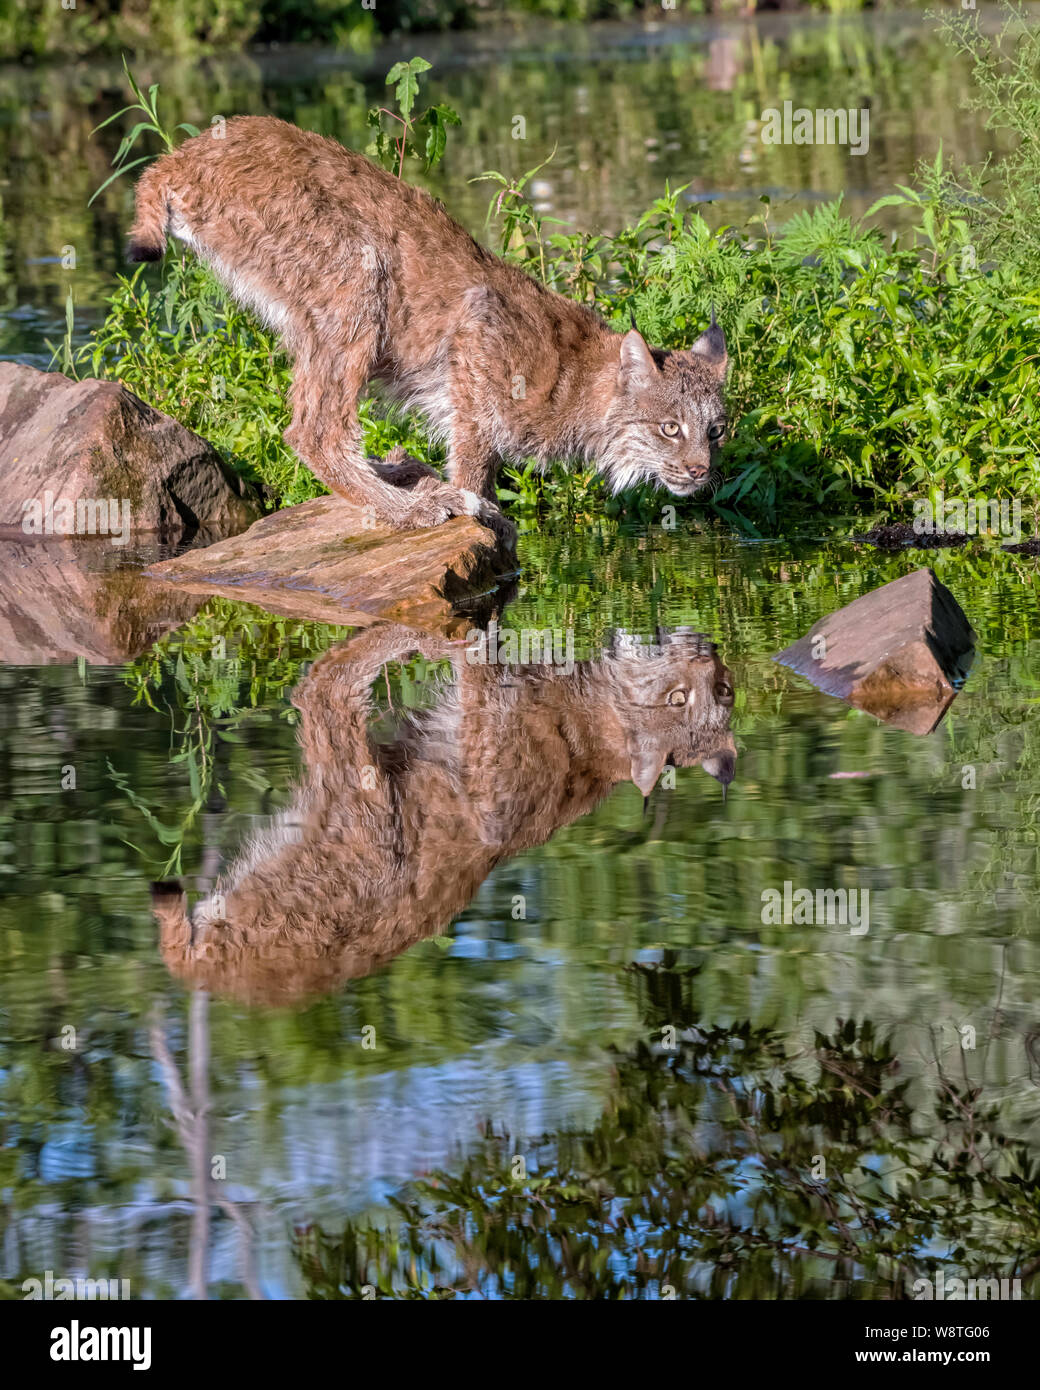 Canada Lynx perched on a Rock in a Body of Water with Reflection Stock Photo